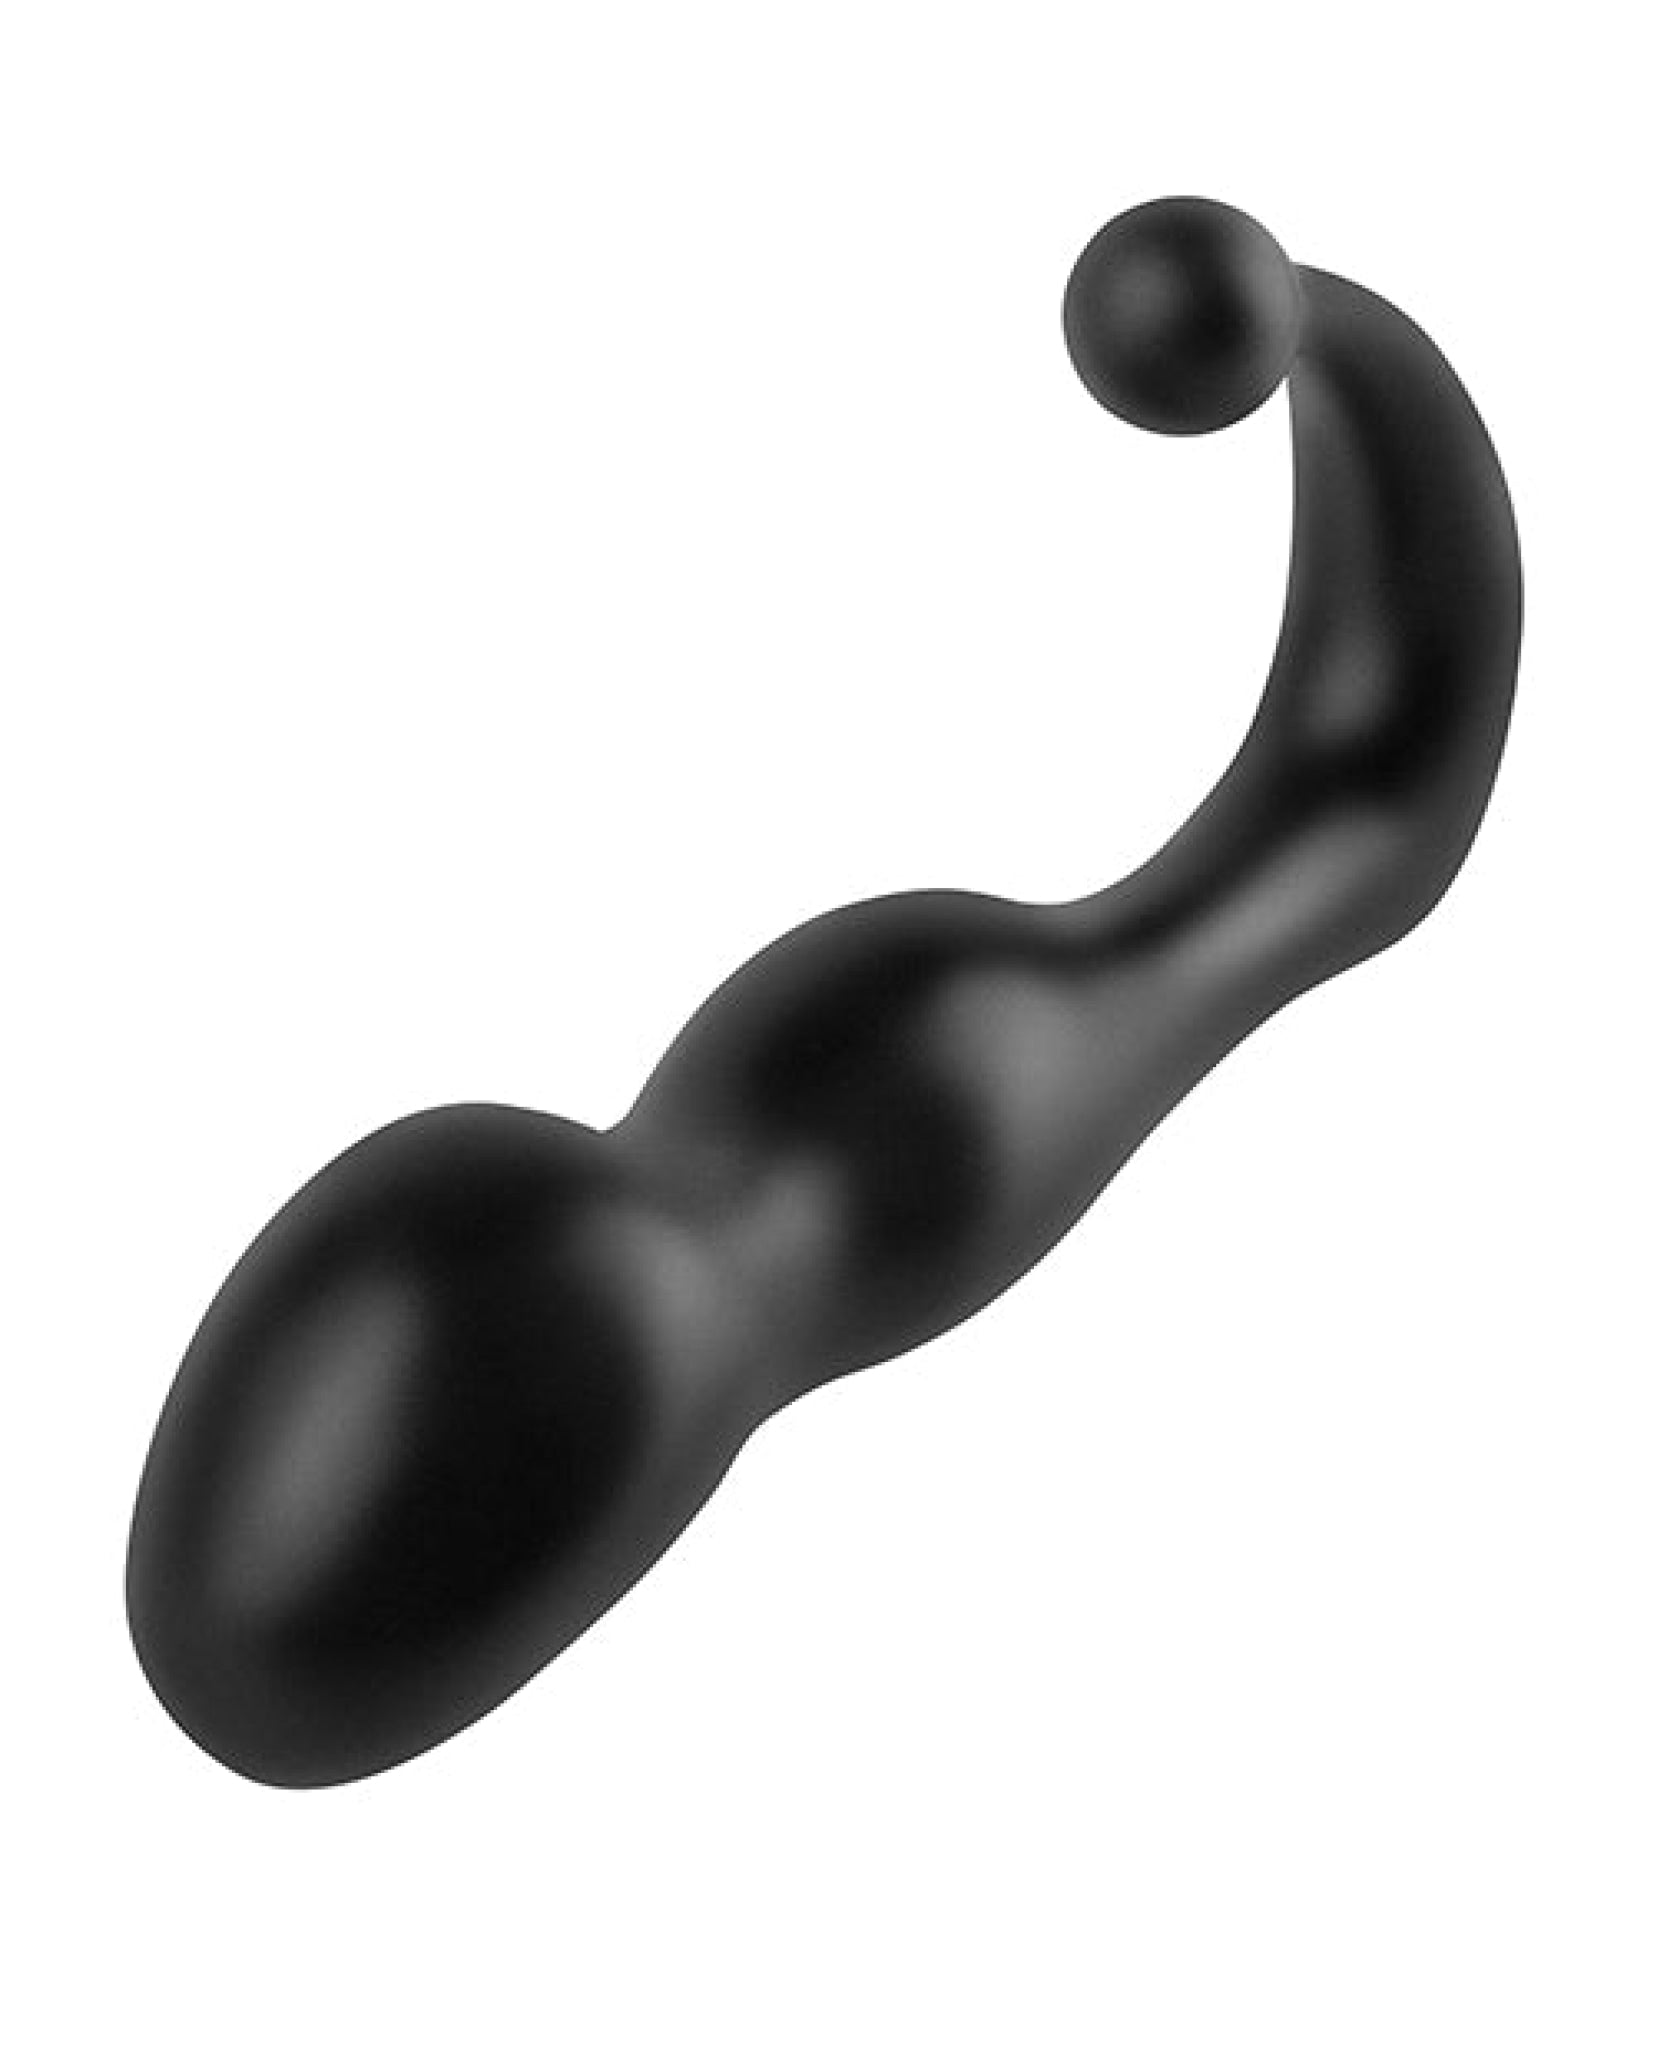 Anal Fantasy Collection Perfect Plug - Black Pipedream®